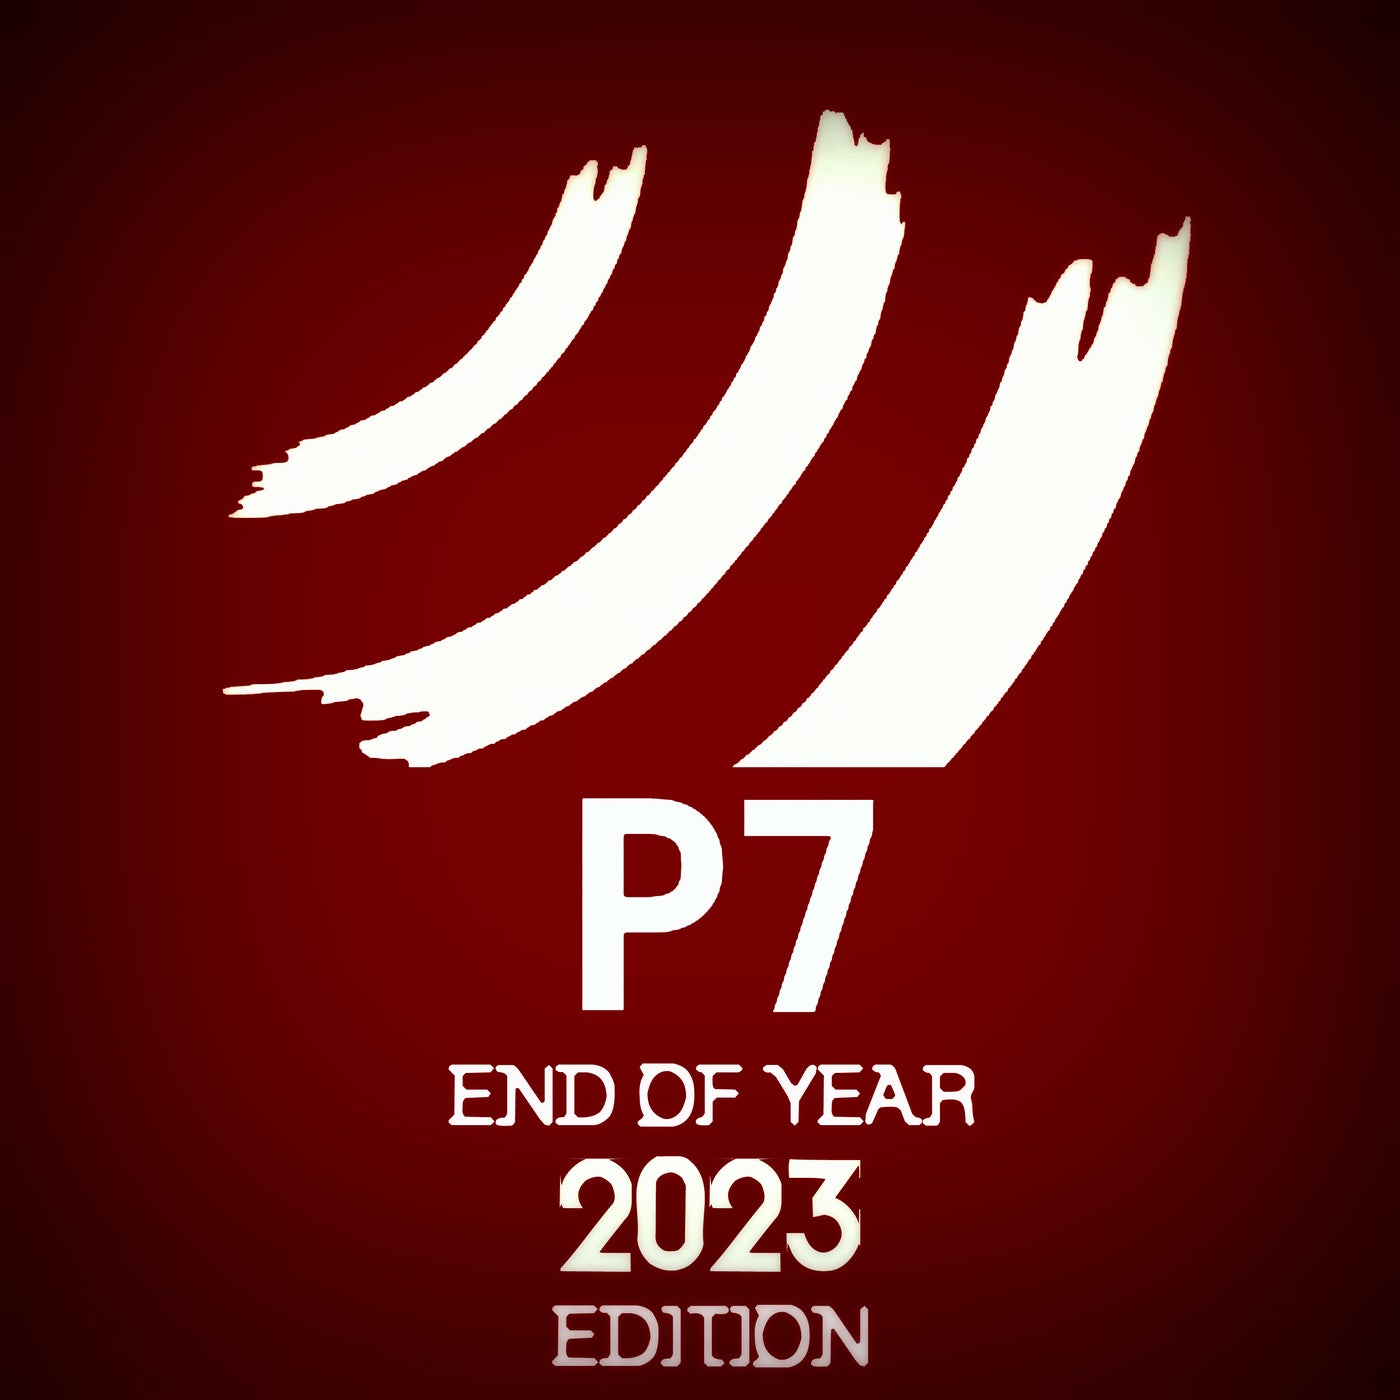 P7 End Of Year 2023 Edition